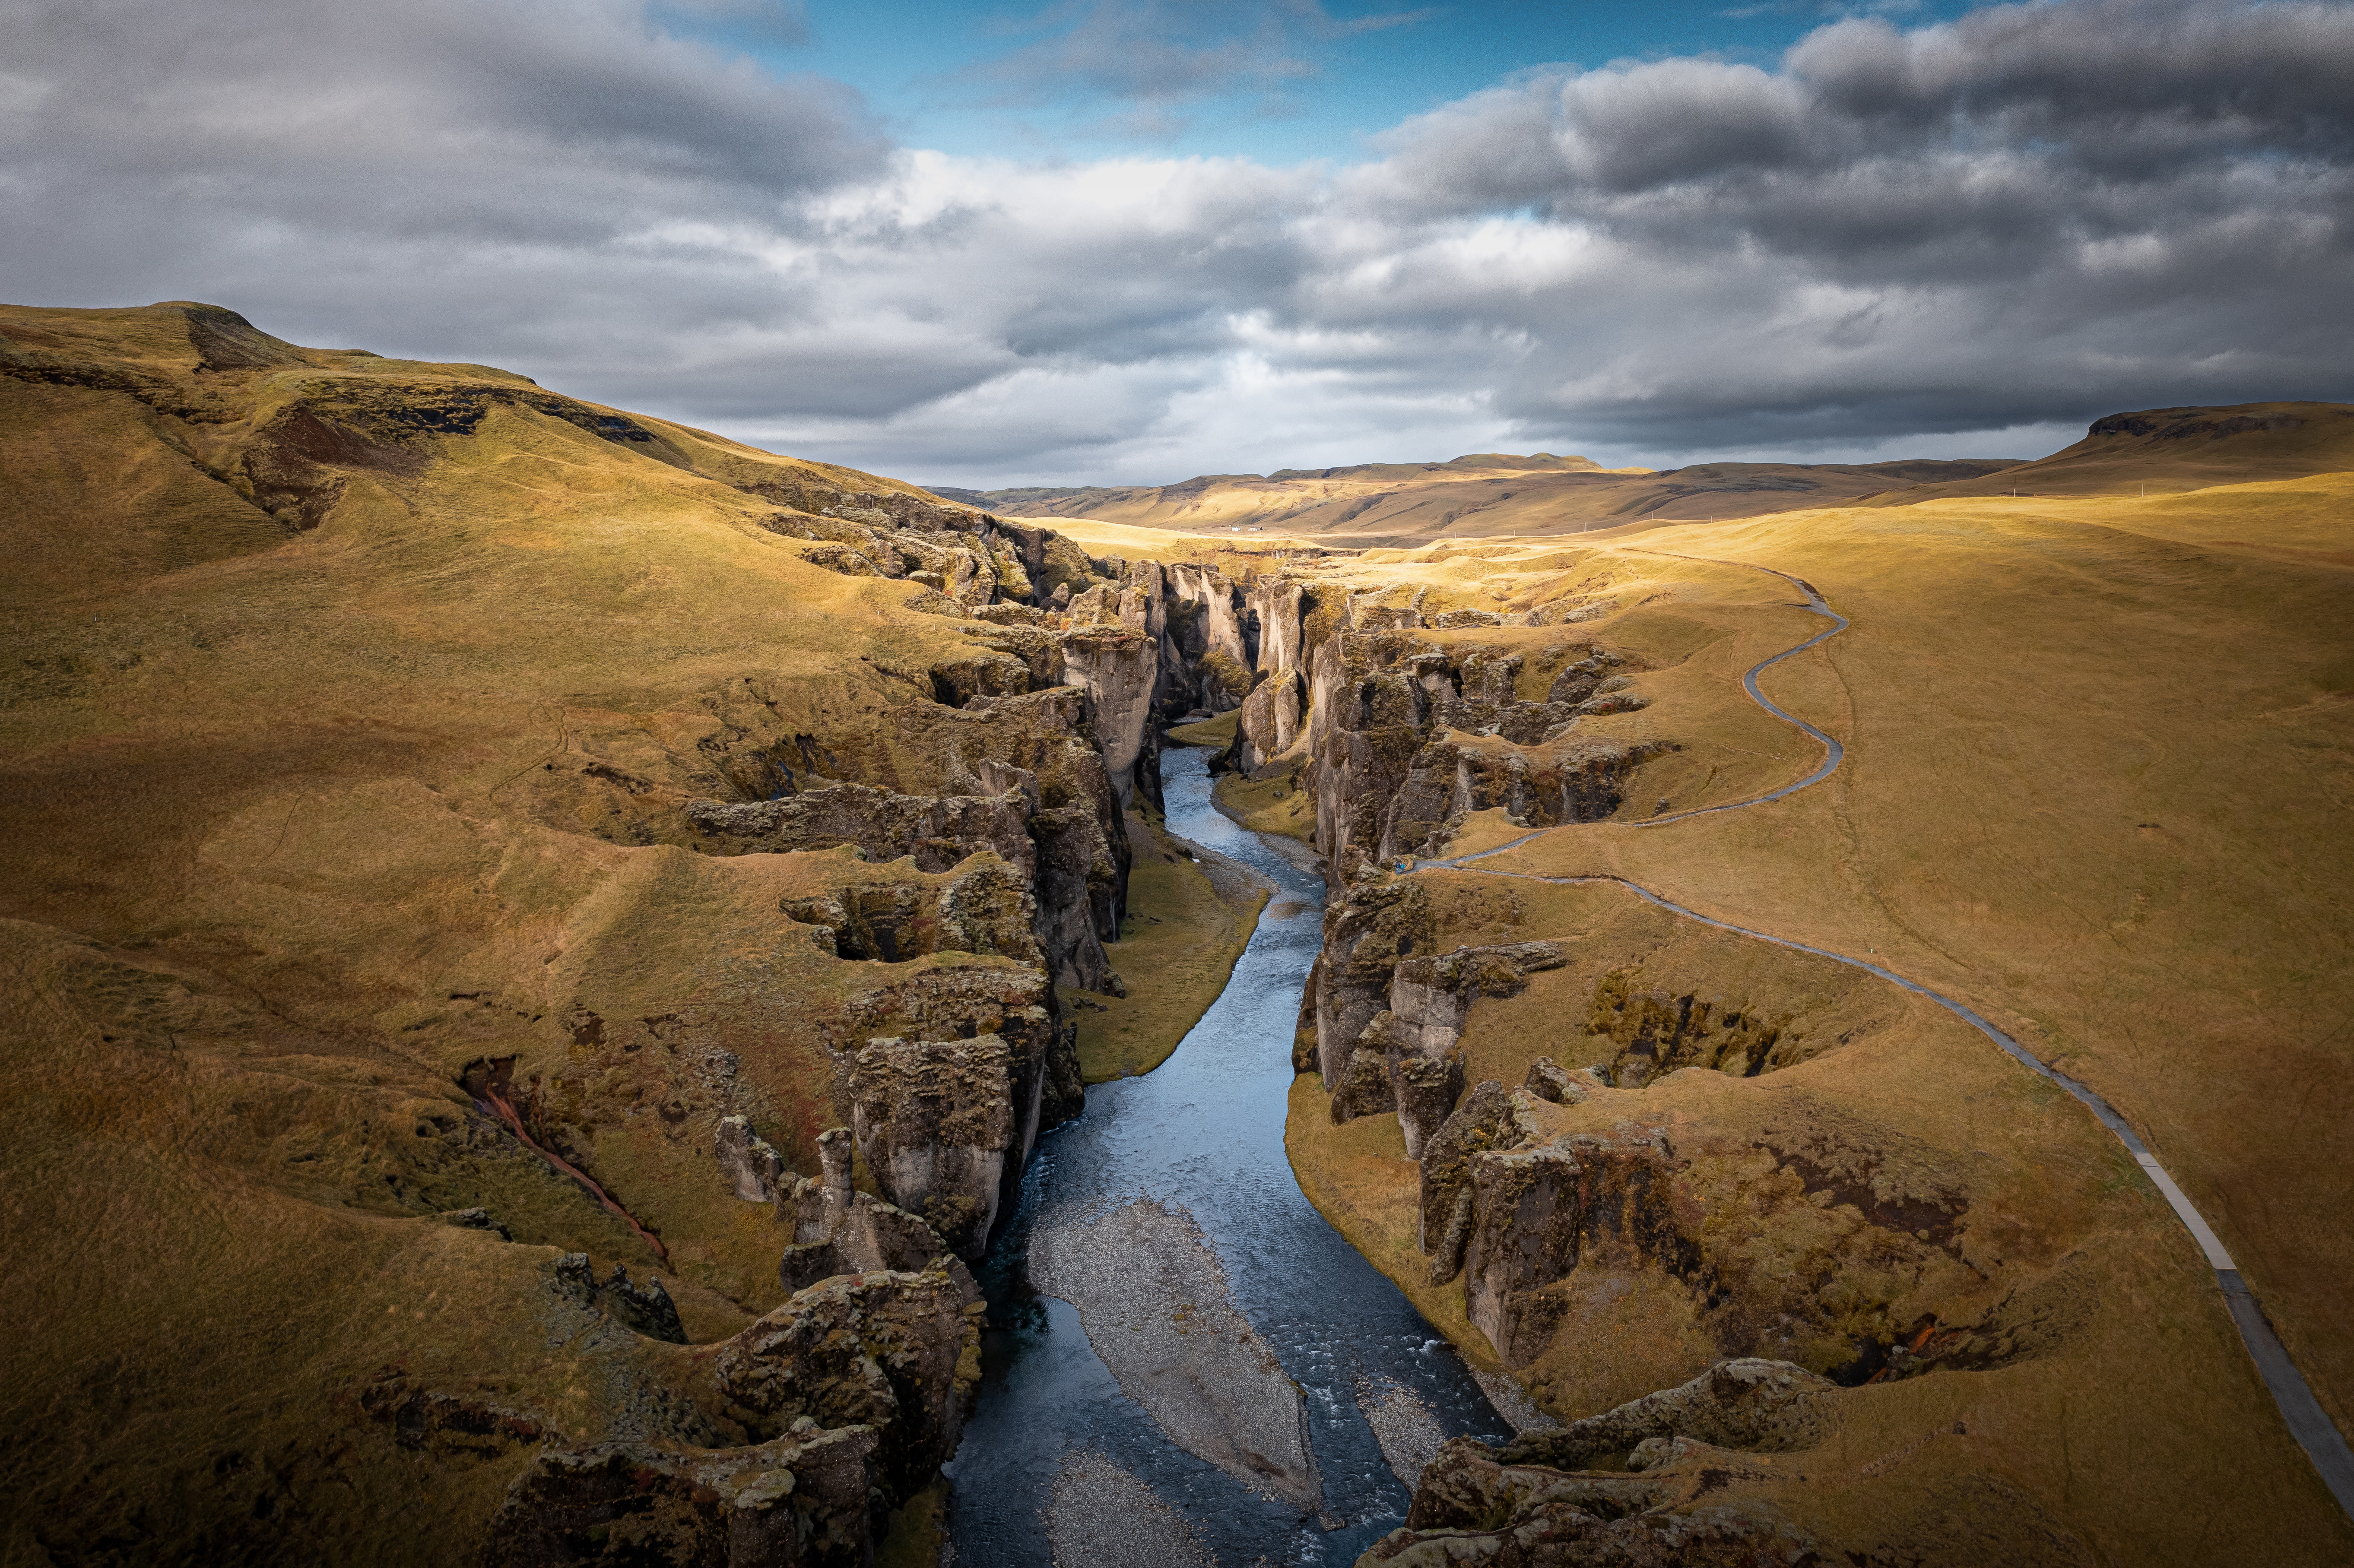 A gorge with a river among the rocks in Iceland